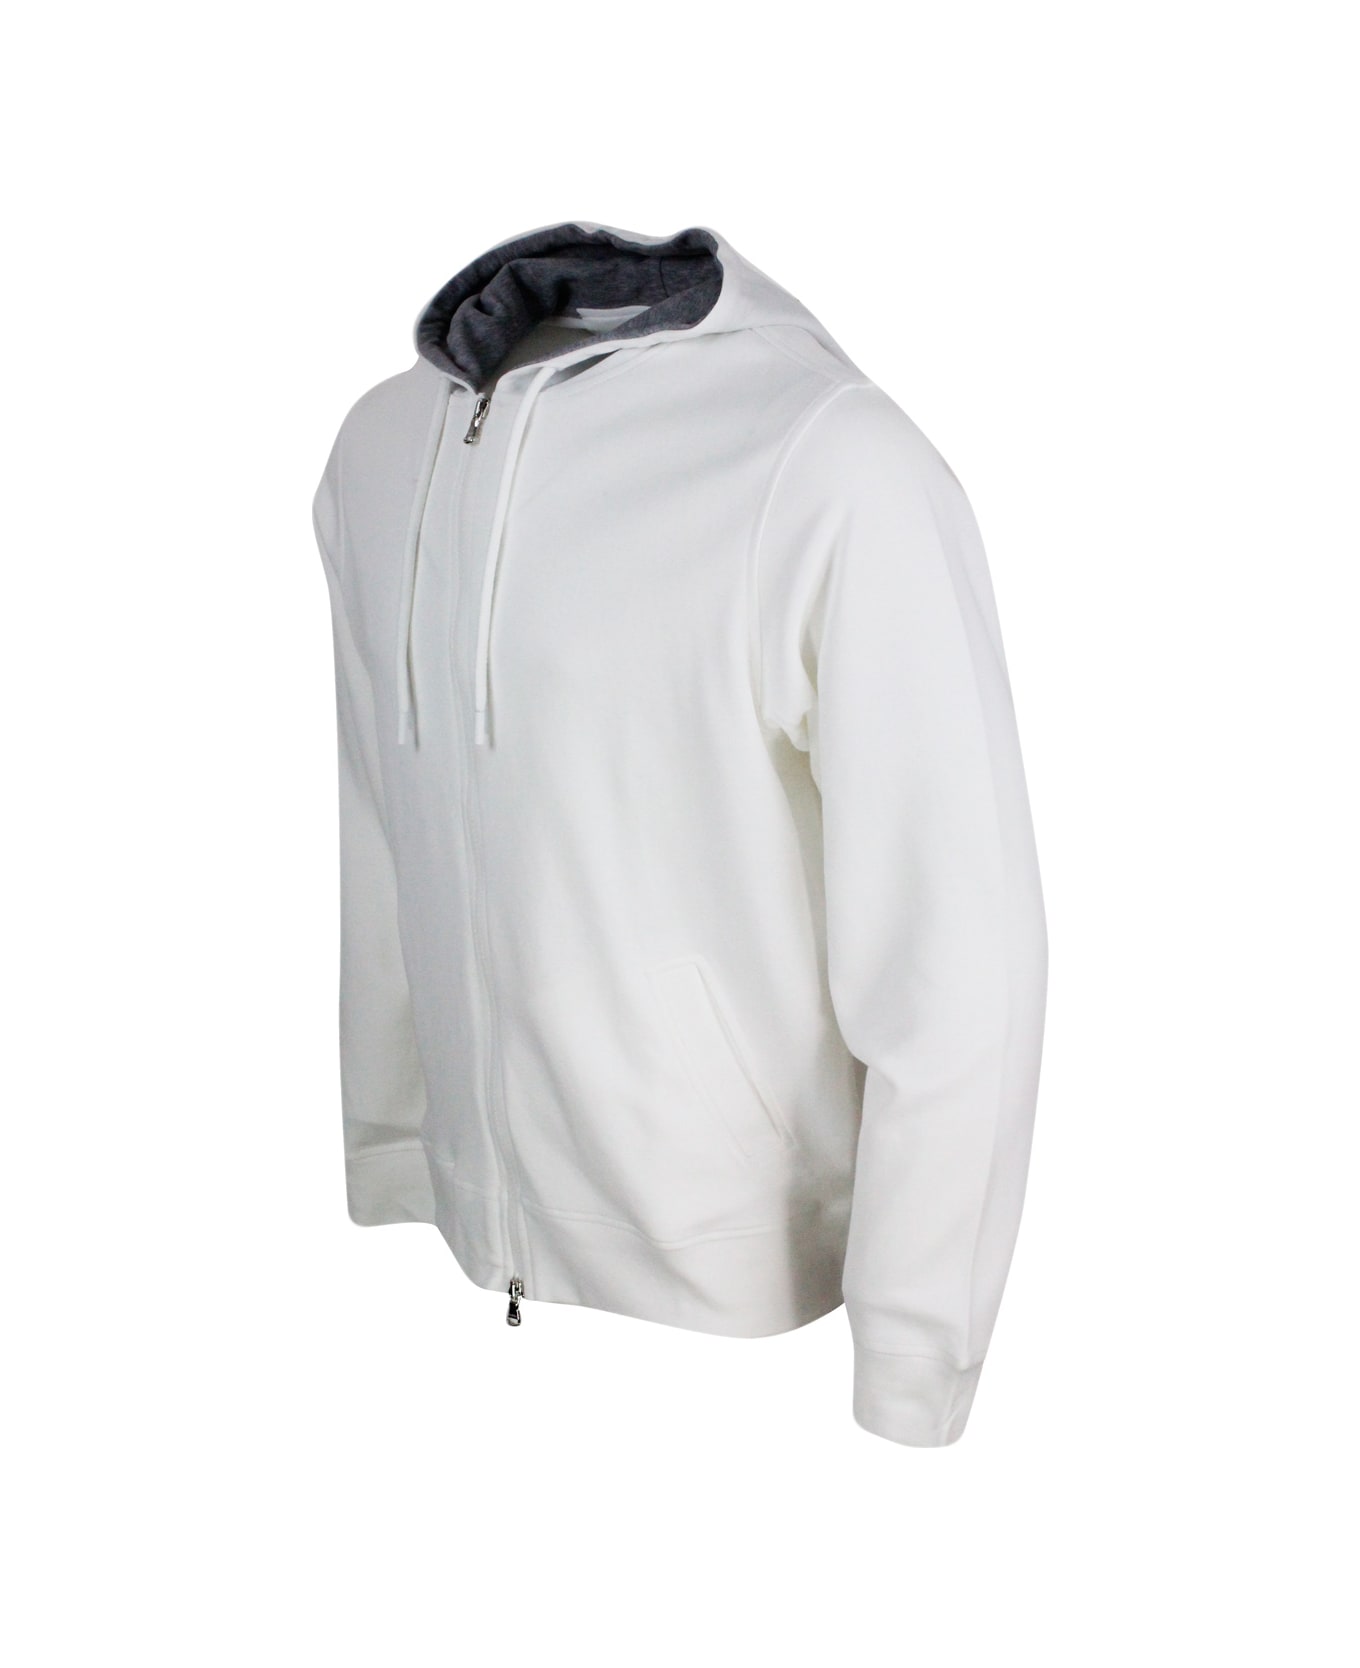 Barba Napoli Lightweight Stretch Cotton Sweatshirt With Hood With Contrasting Color Interior And Zip Closure - White